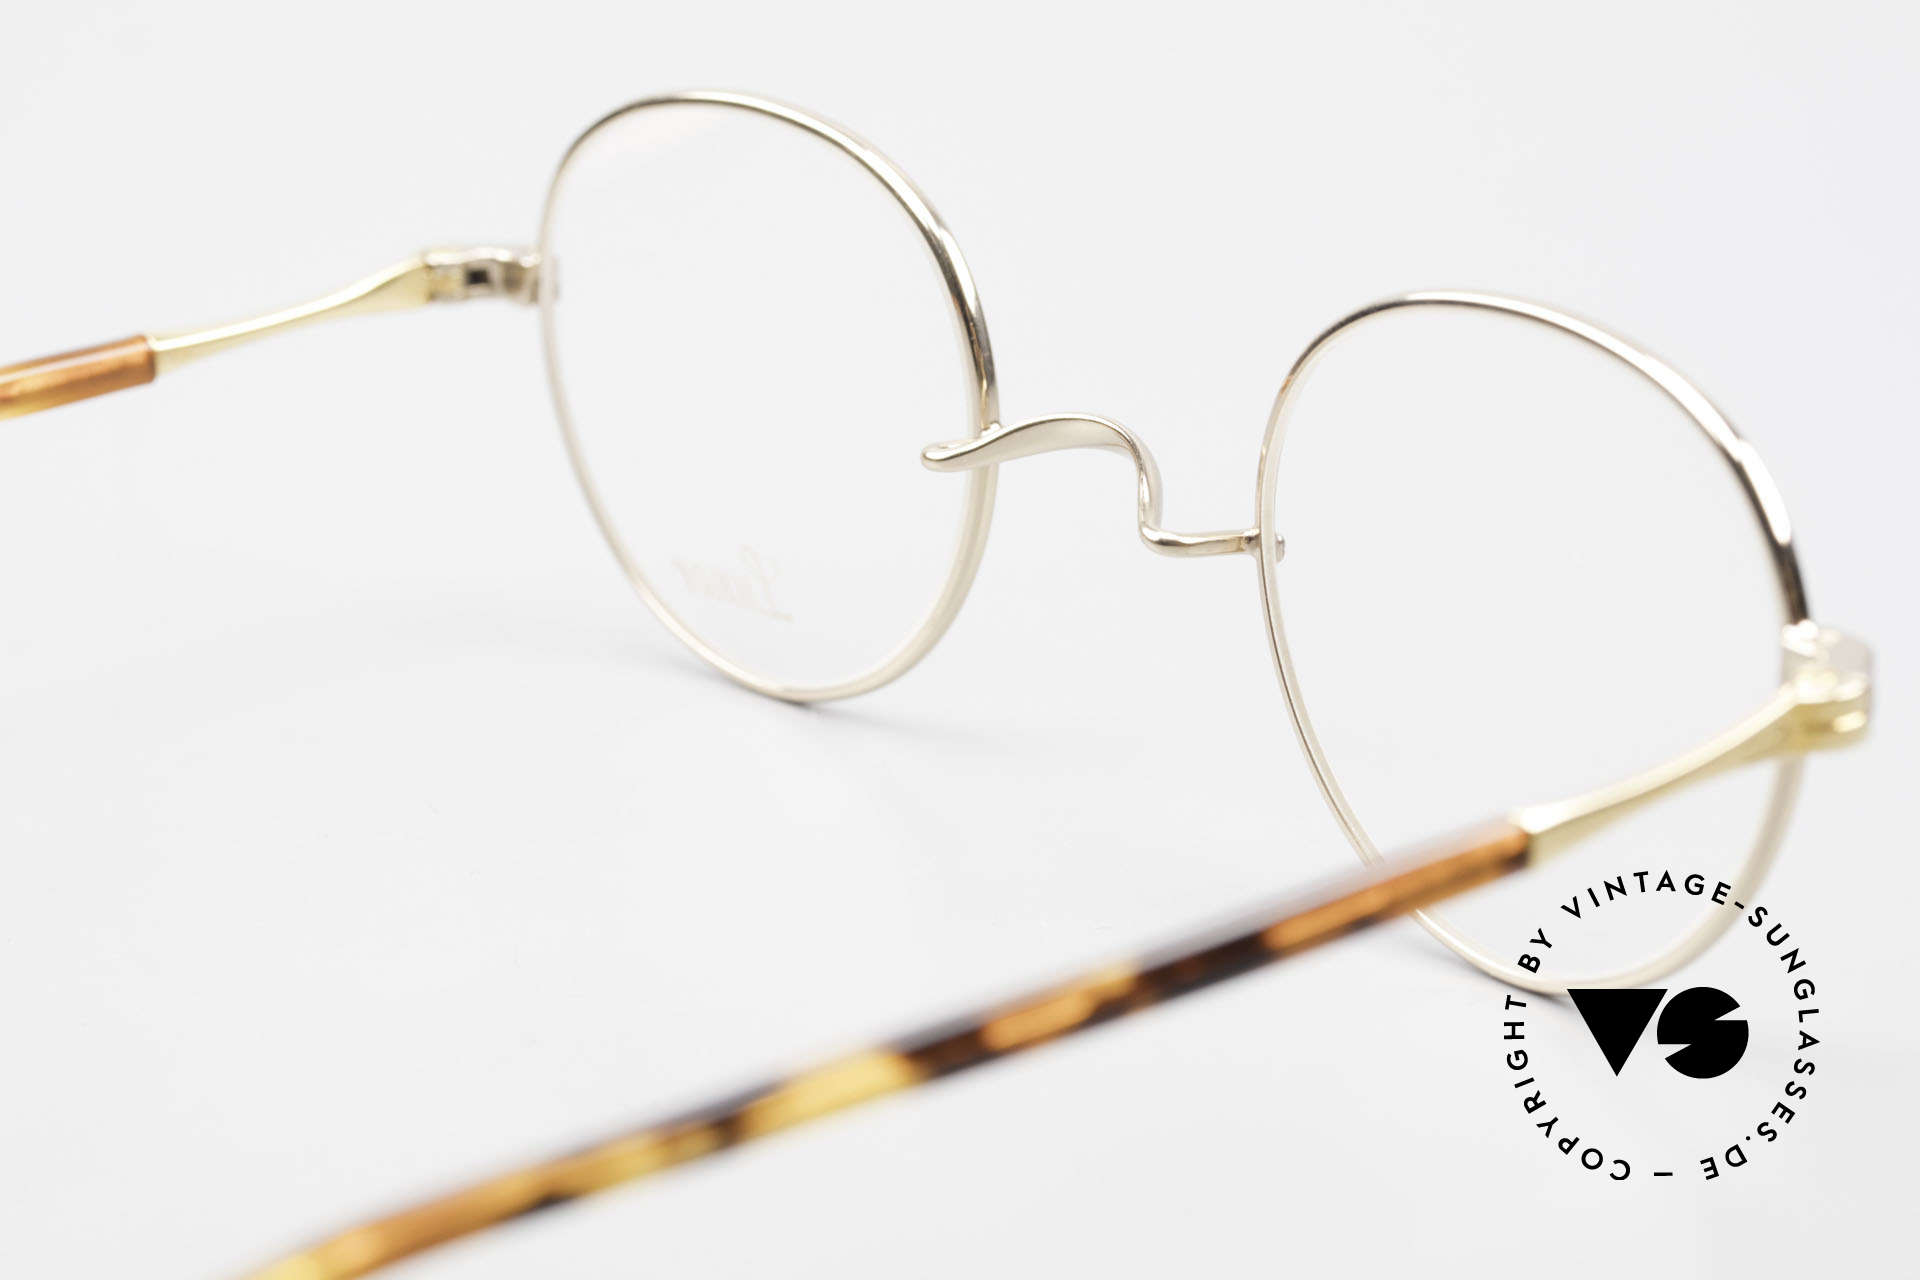 Lunor II A 22 Round Lunor Specs Gold Plated, full rimmed frame can be glazed with lenses of any kind, Made for Men and Women